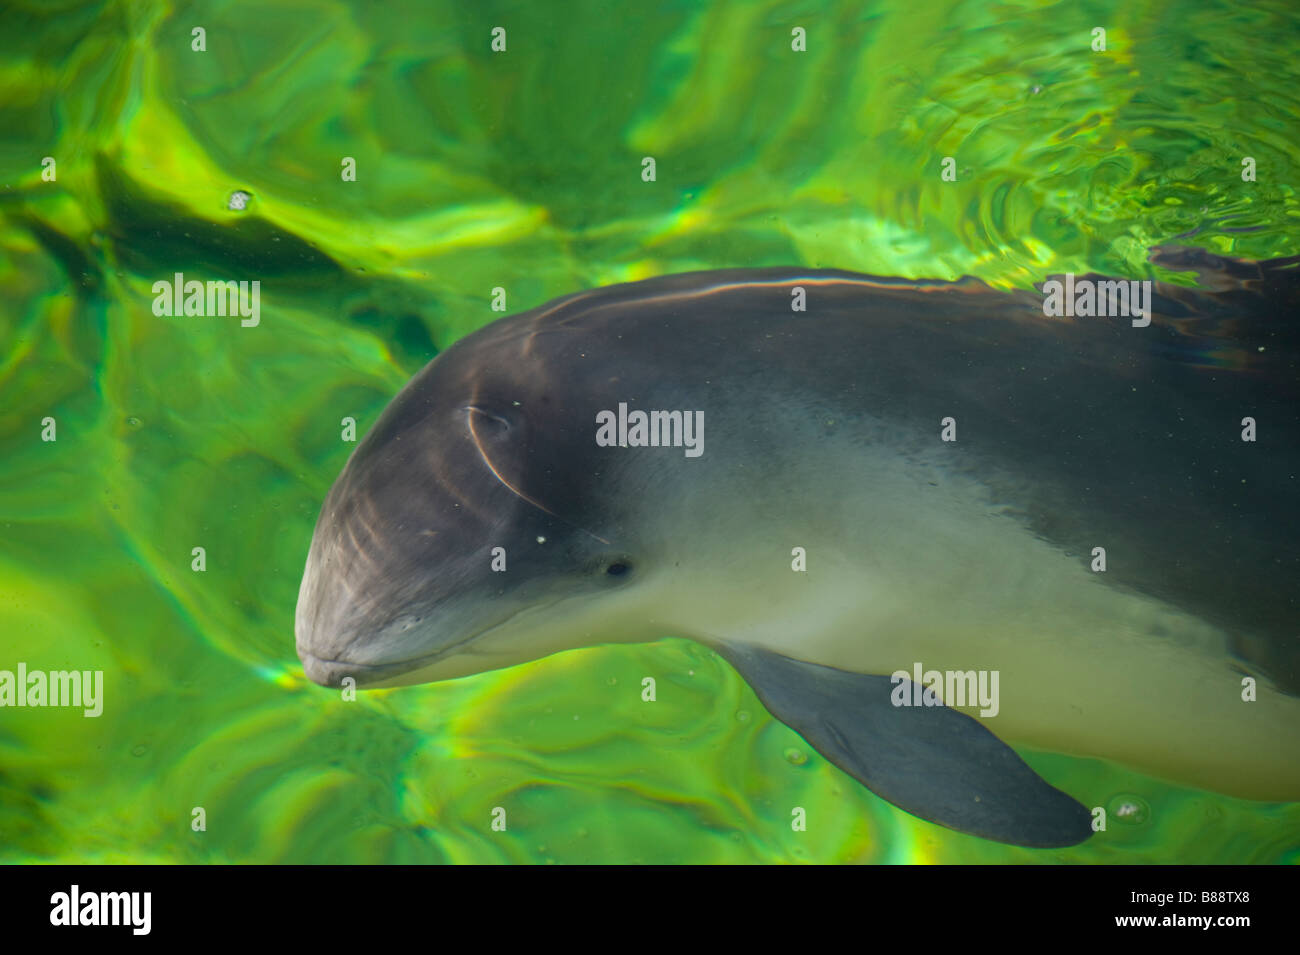 A Common Porpoise in green water Stock Photo - Alamy